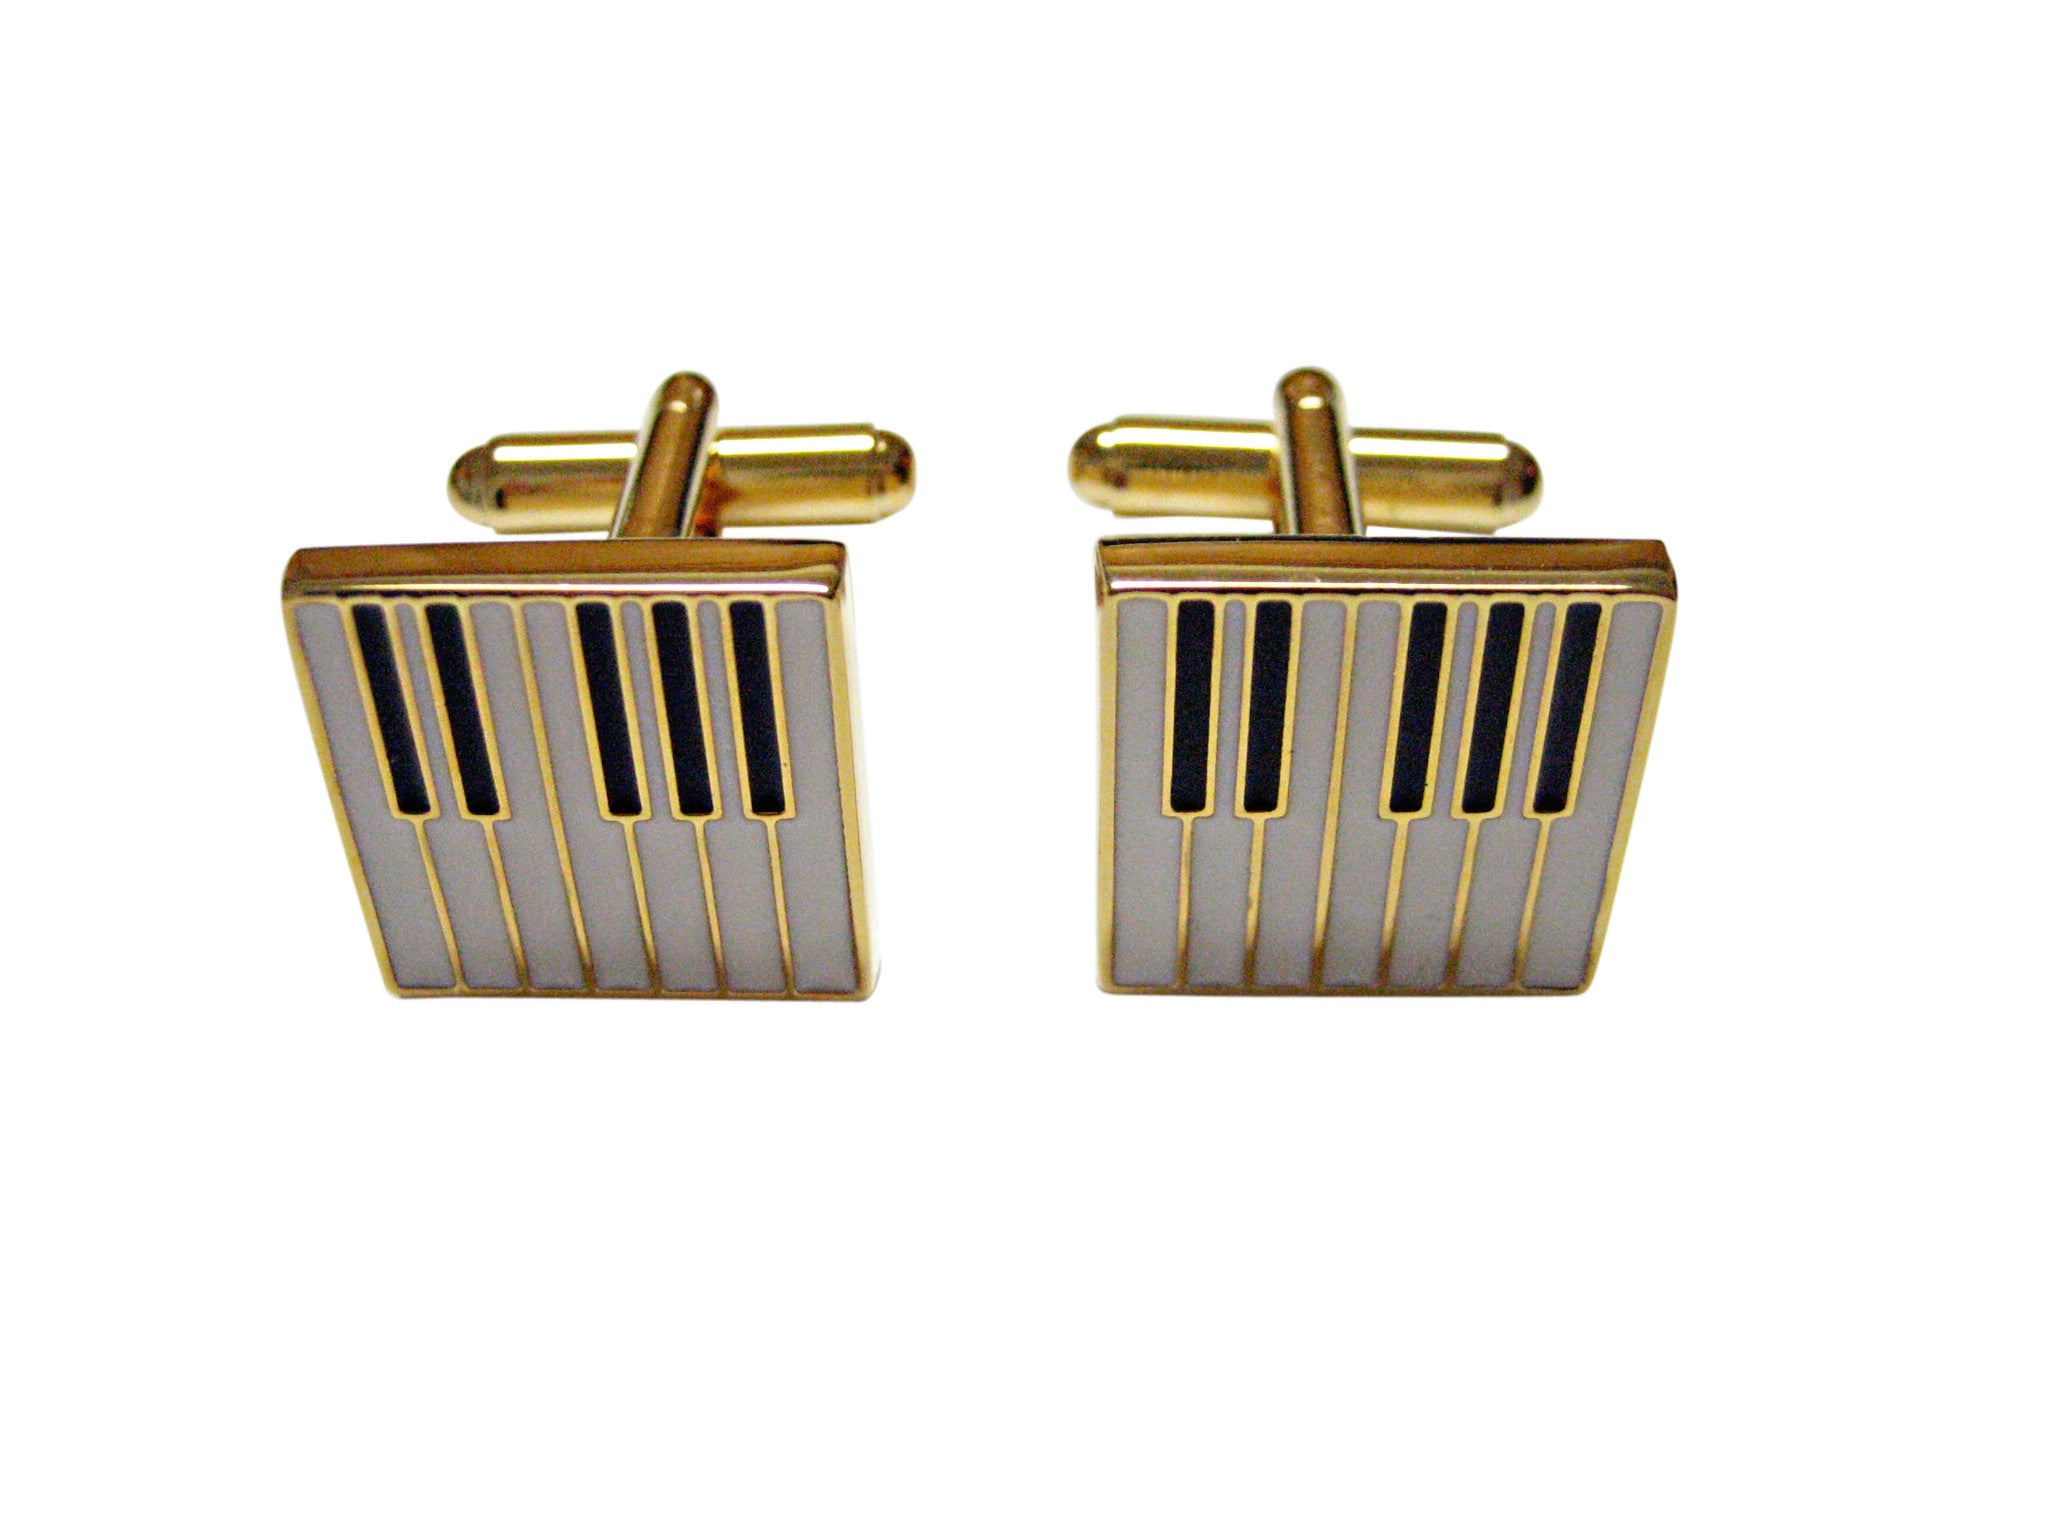 Gold and White Toned Square Piano Key Cufflinks